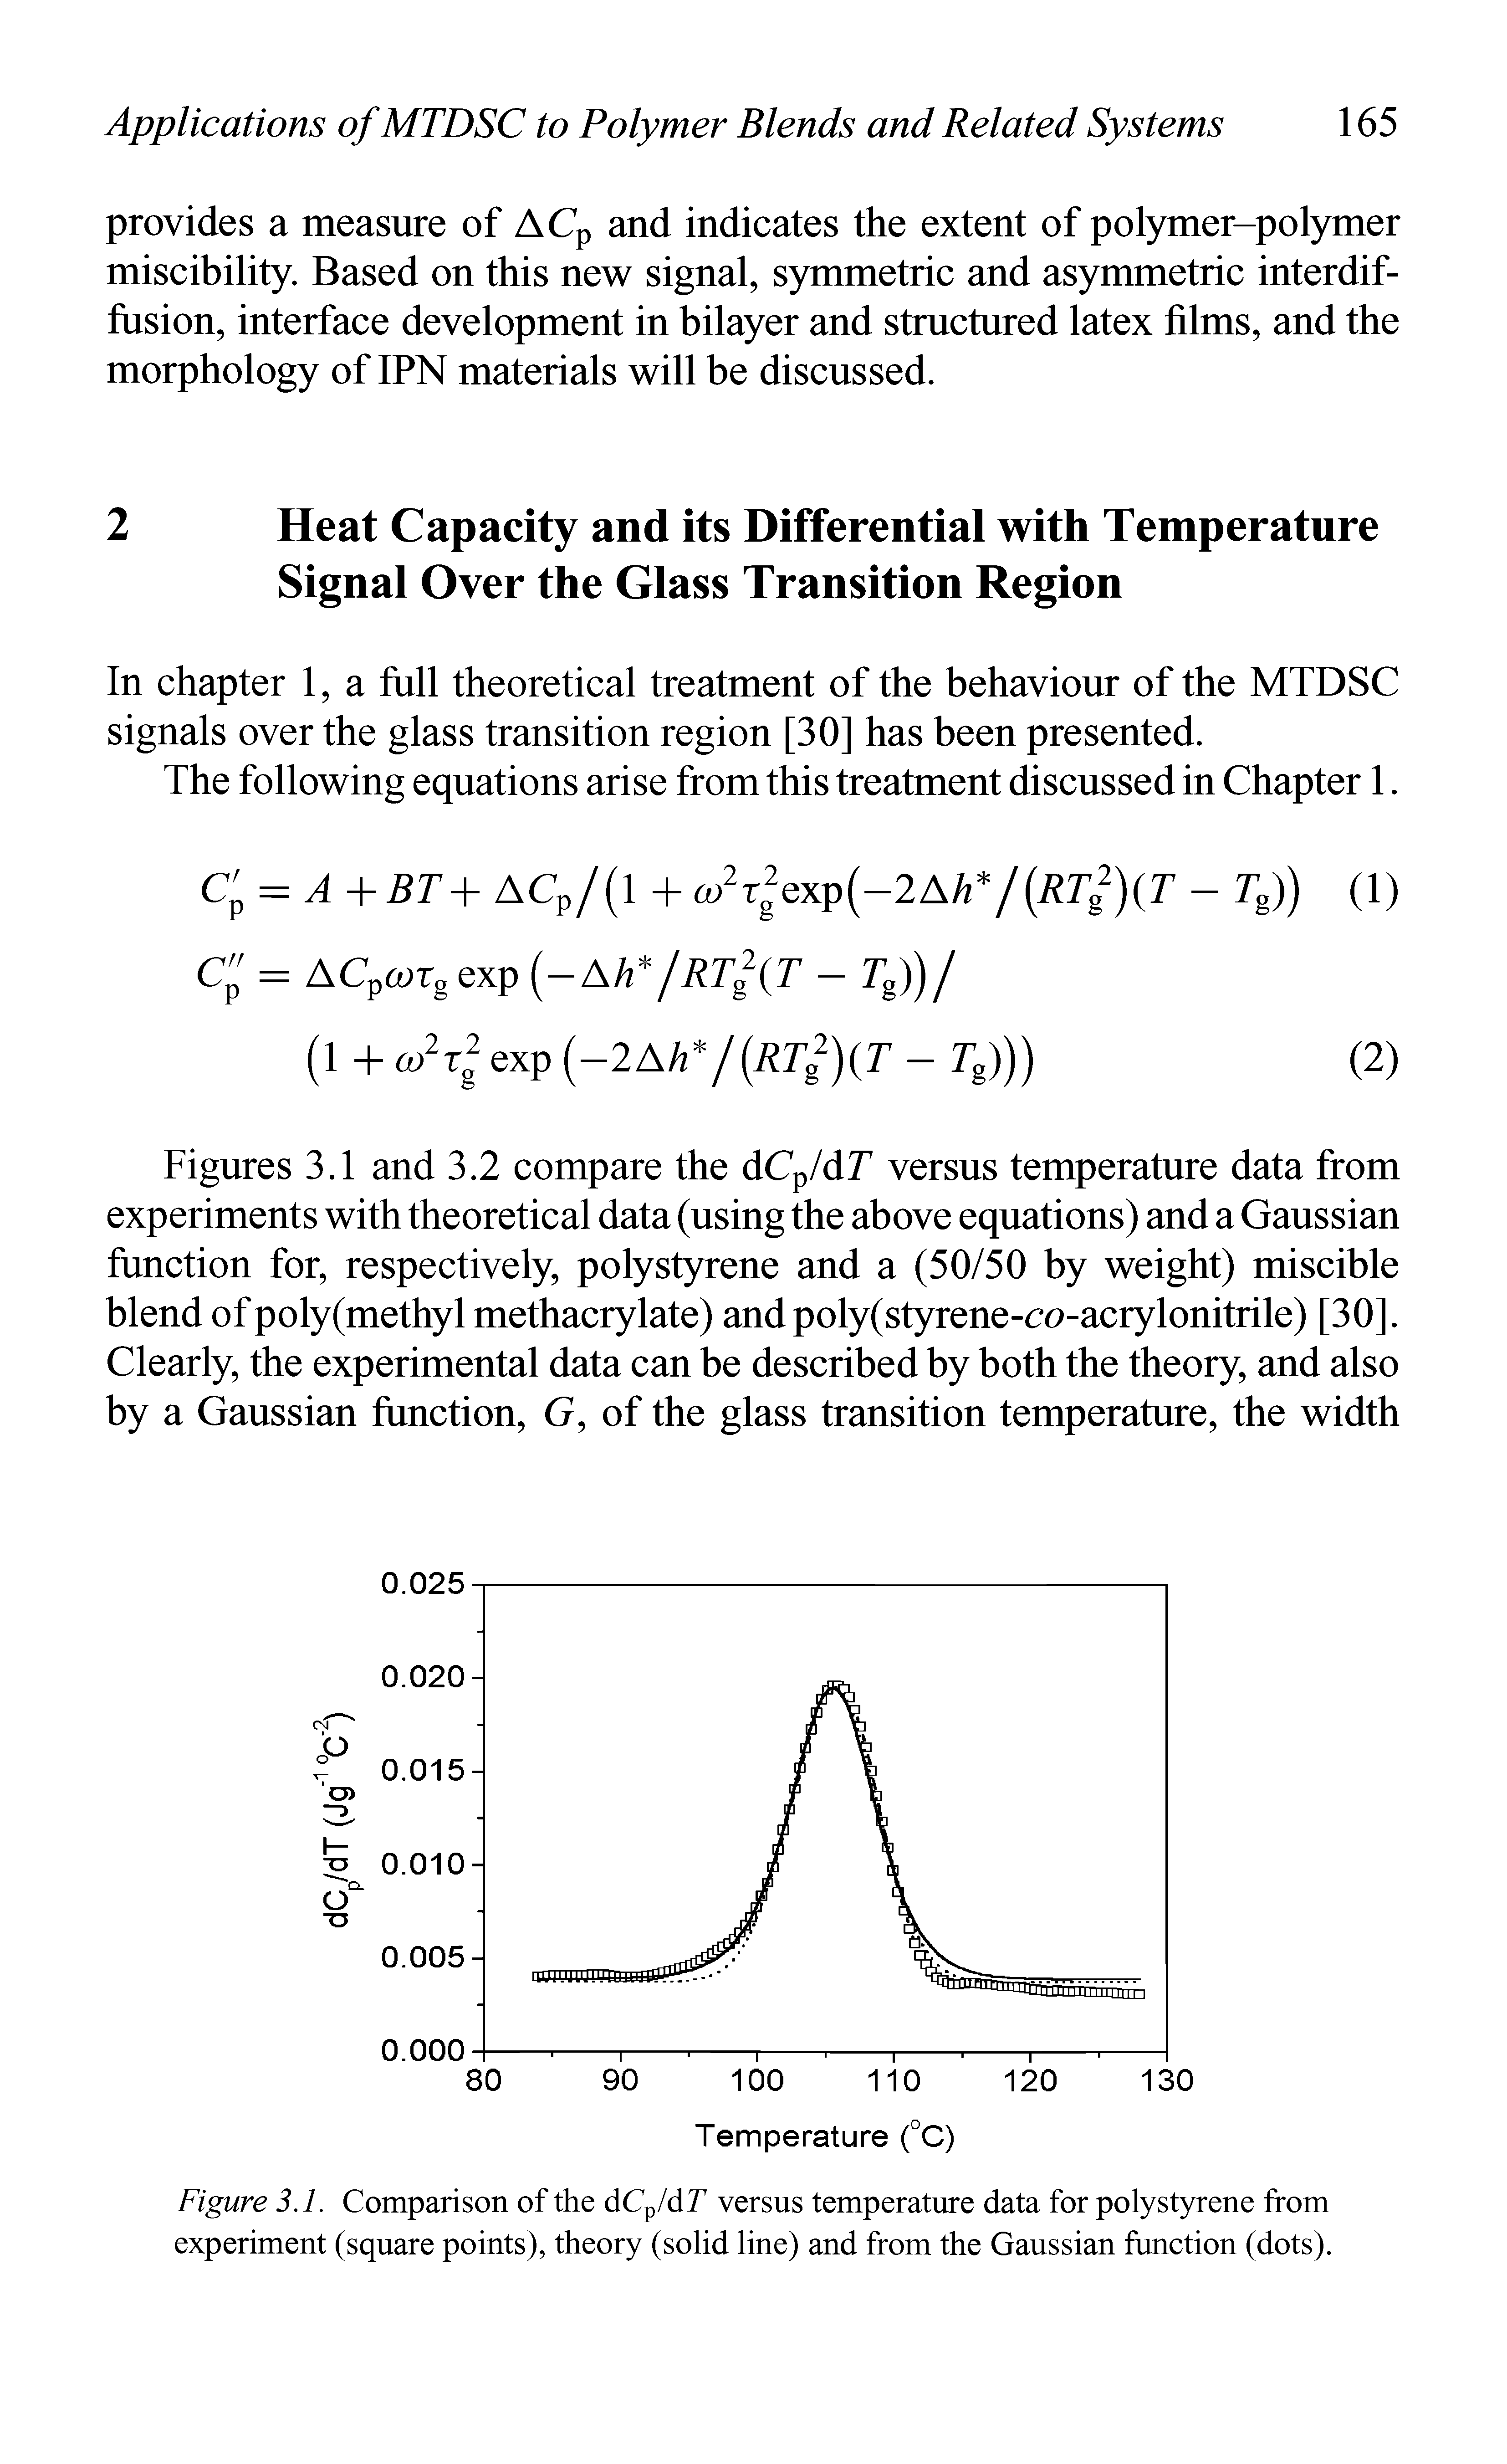 Figures 3.1 and 3.2 compare the dCp/dT versus temperature data from experiments with theoretical data (using the above equations) and a Gaussian function for, respectively, polystyrene and a (50/50 by weight) miscible blend of poly(methyl methacrylate) andpoly(styrene-co-acrylonitrile) [30]. Clearly, the experimental data can be described by both the theory, and also by a Gaussian function, G, of the glass transition temperature, the width...